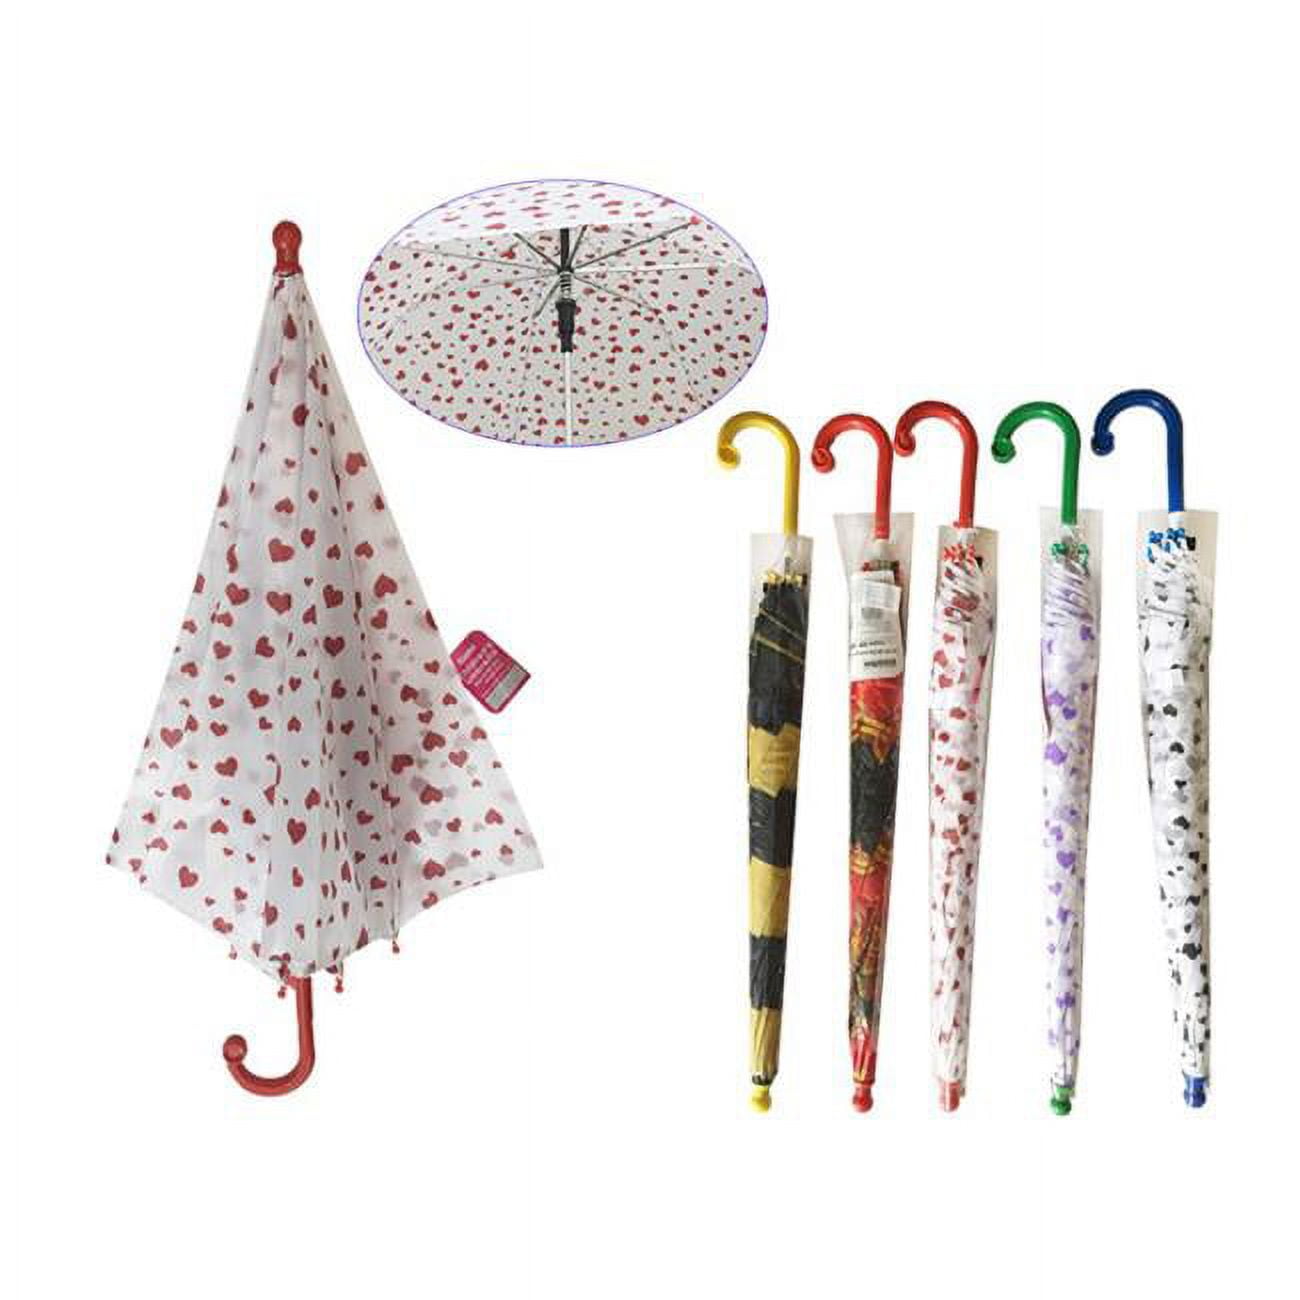 Picture of Familymaid 12153A 23 in. Childrens Umbrella with 18.5 in. Shade, 3 Assorted Color